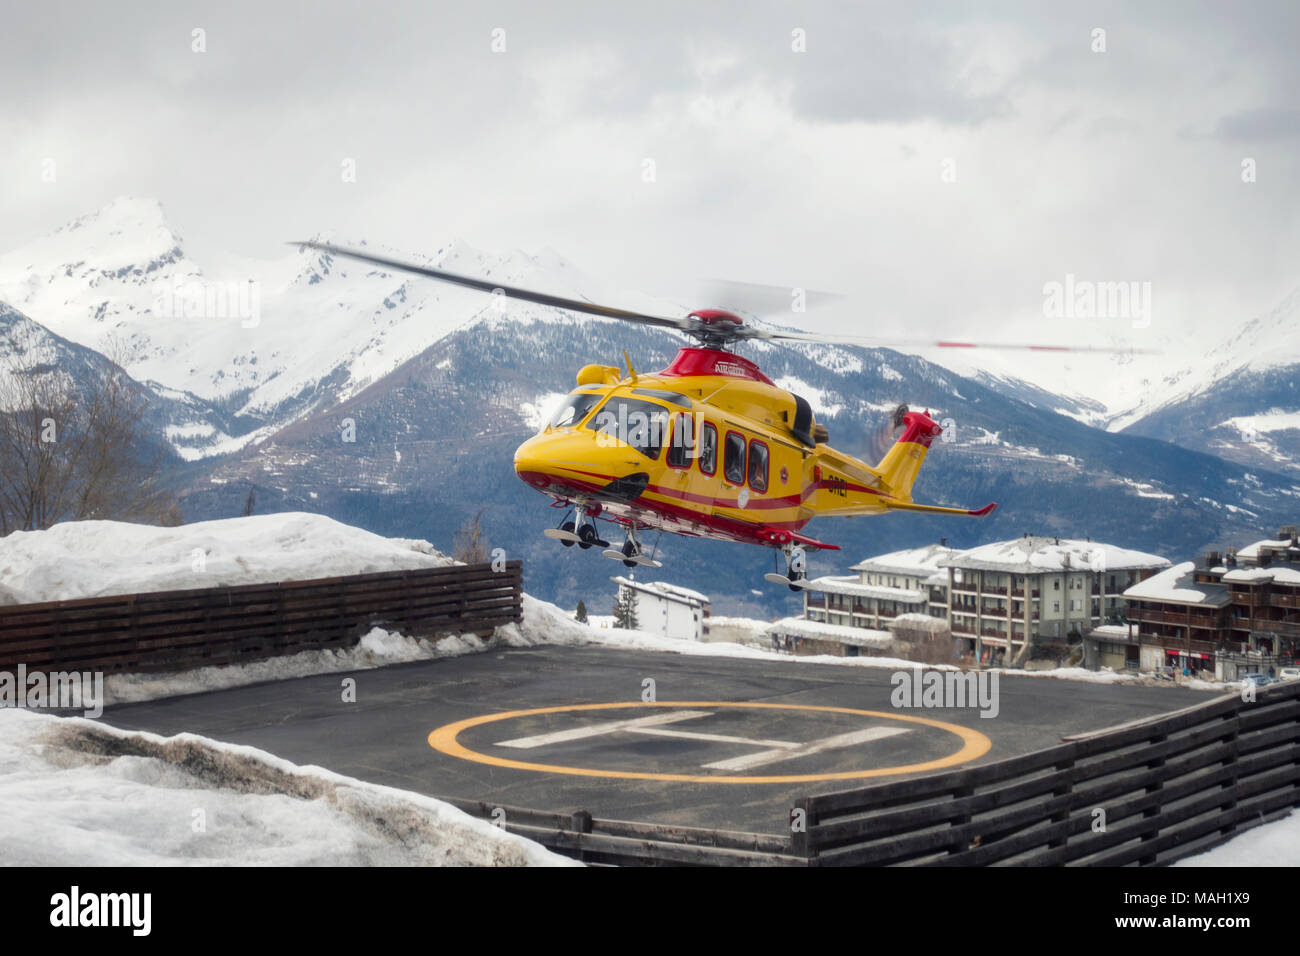 PILA, ITALY-MARCH 29, 2018: rescue helicopter manage an emergency on the snow on ski slope Stock Photo